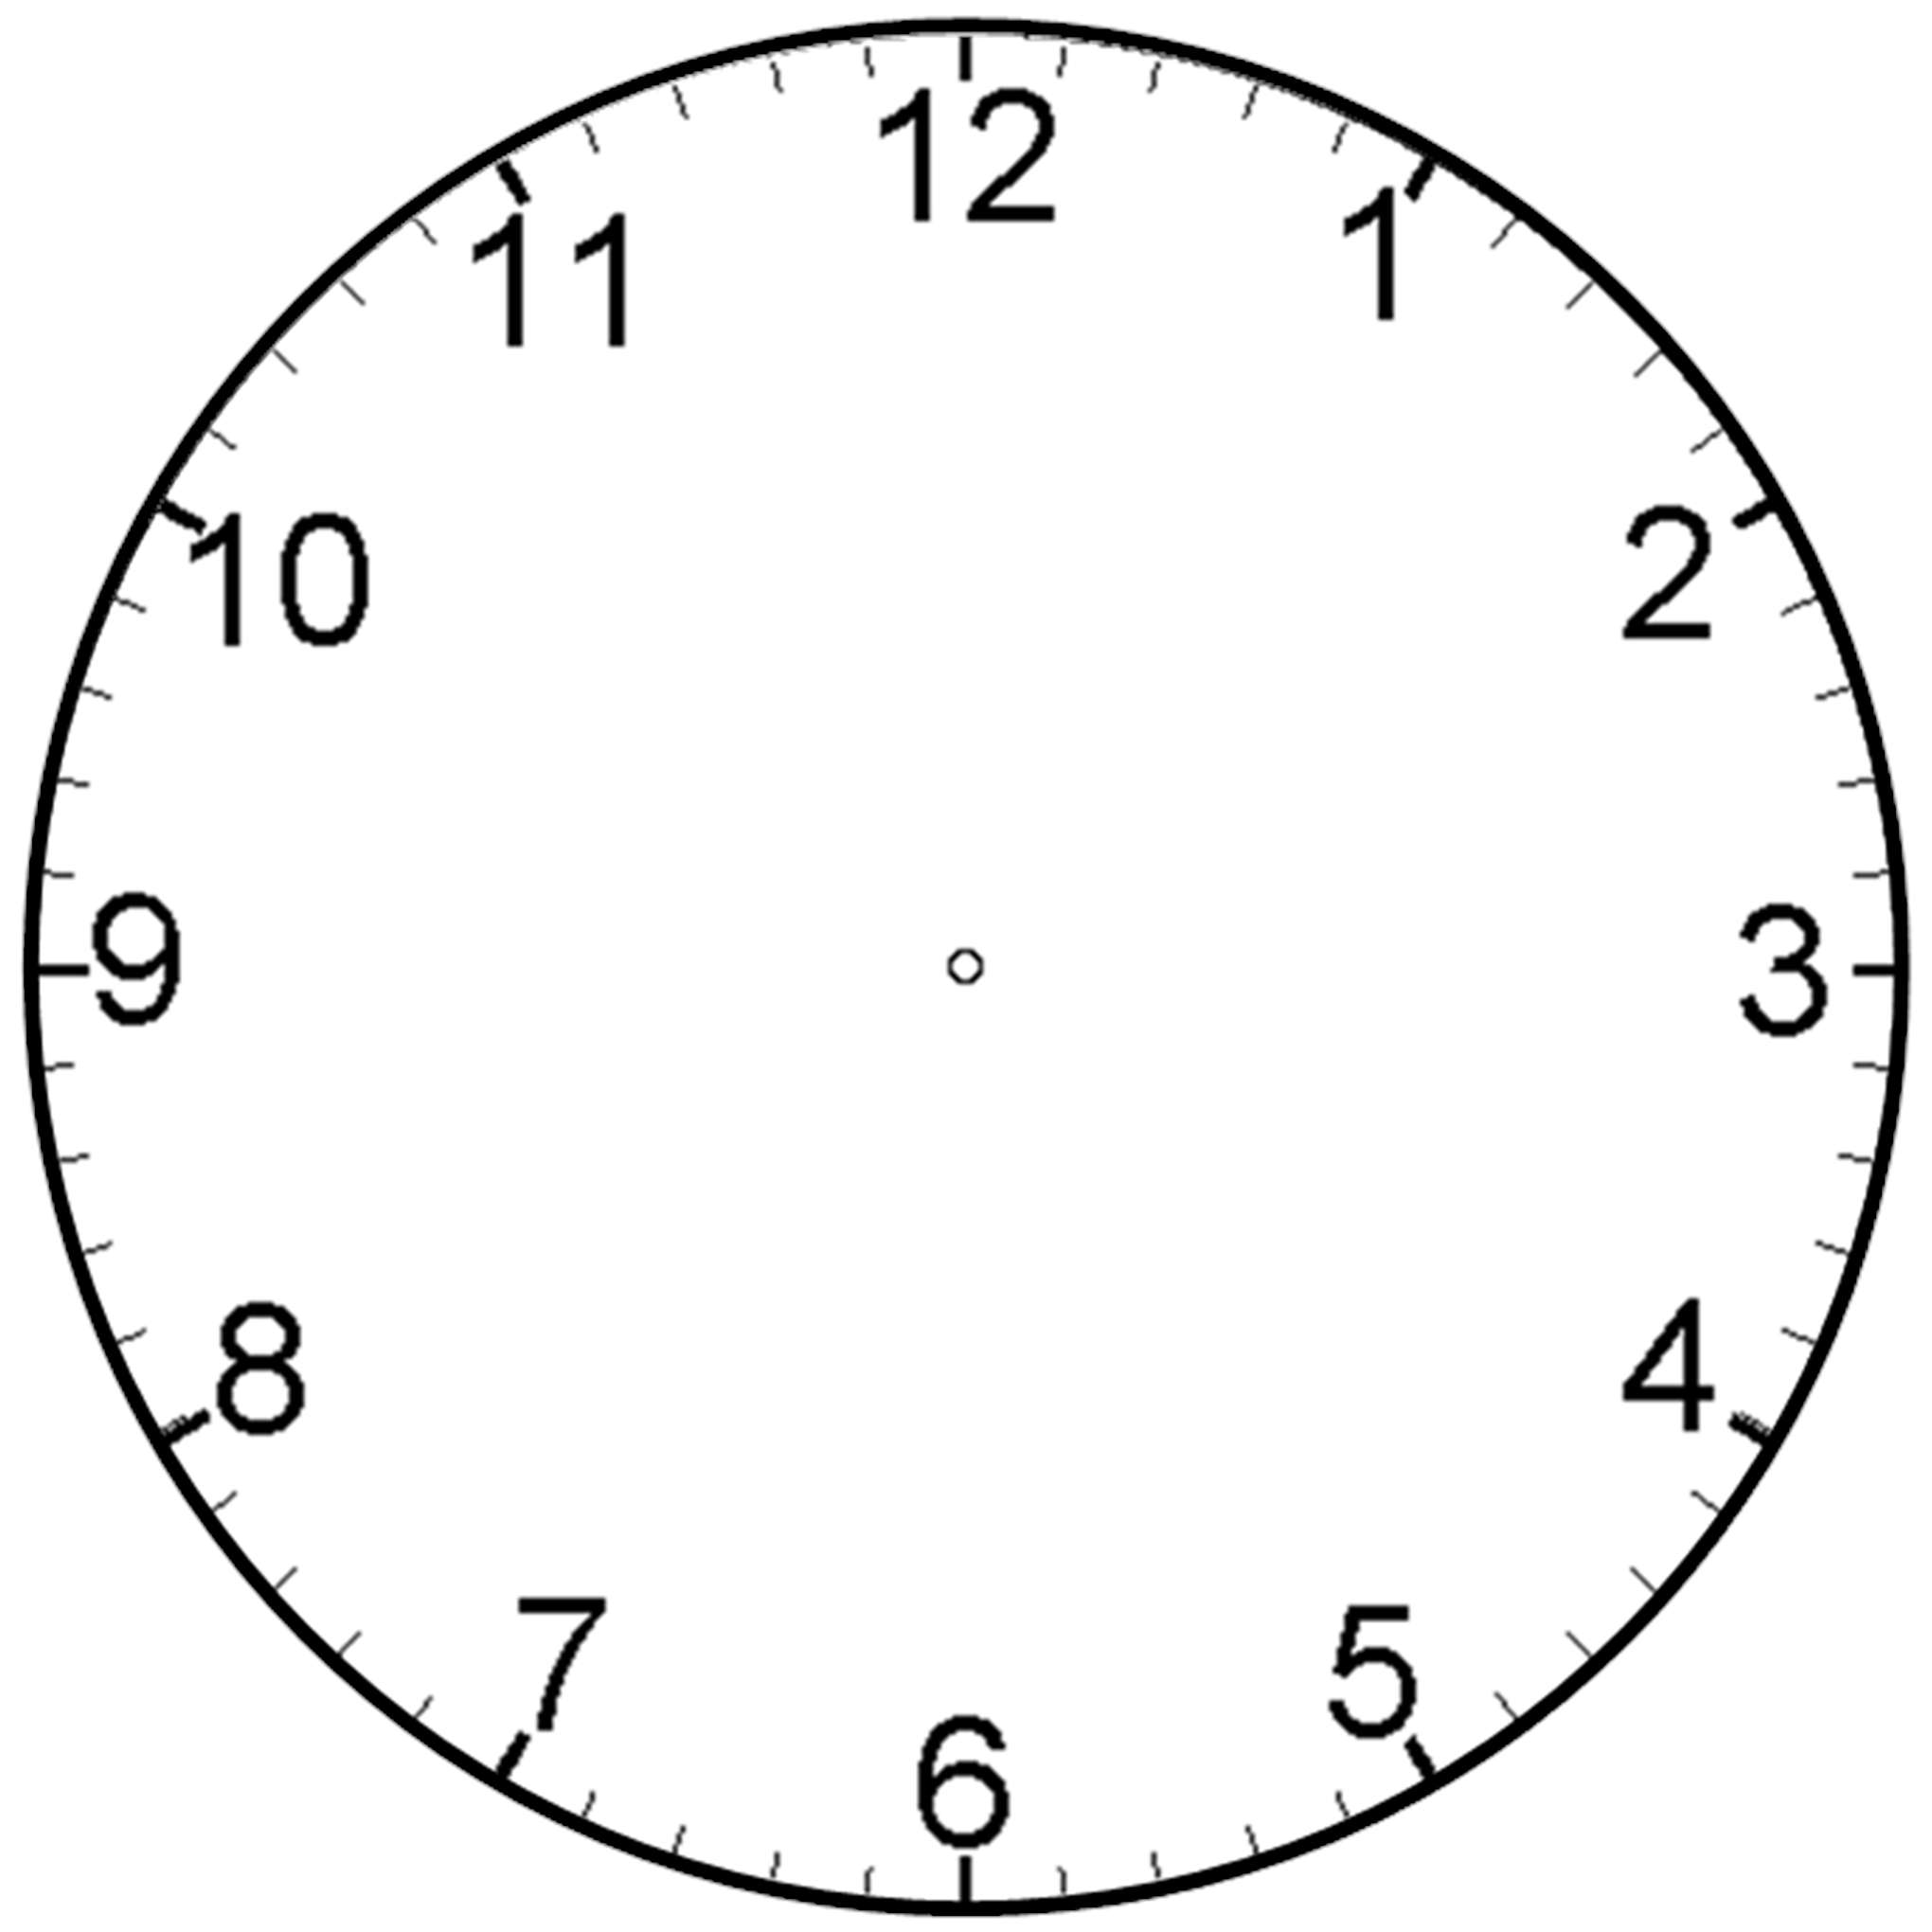 free-clock-face-template-clock-with-no-hands-clipart-104075